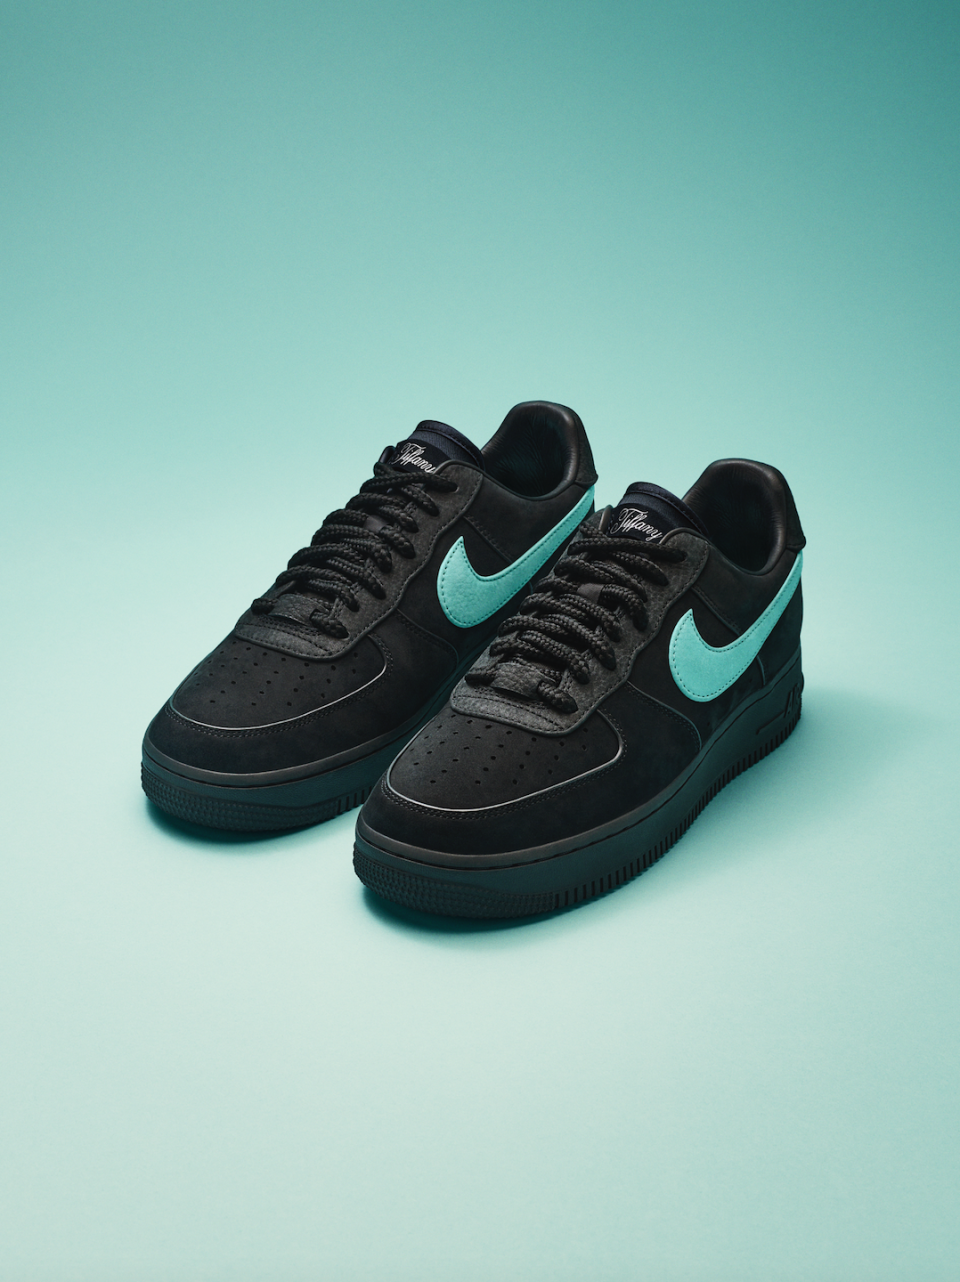  Nike x Tiffany & Co. - Air Force 1 1837 - Sneakers